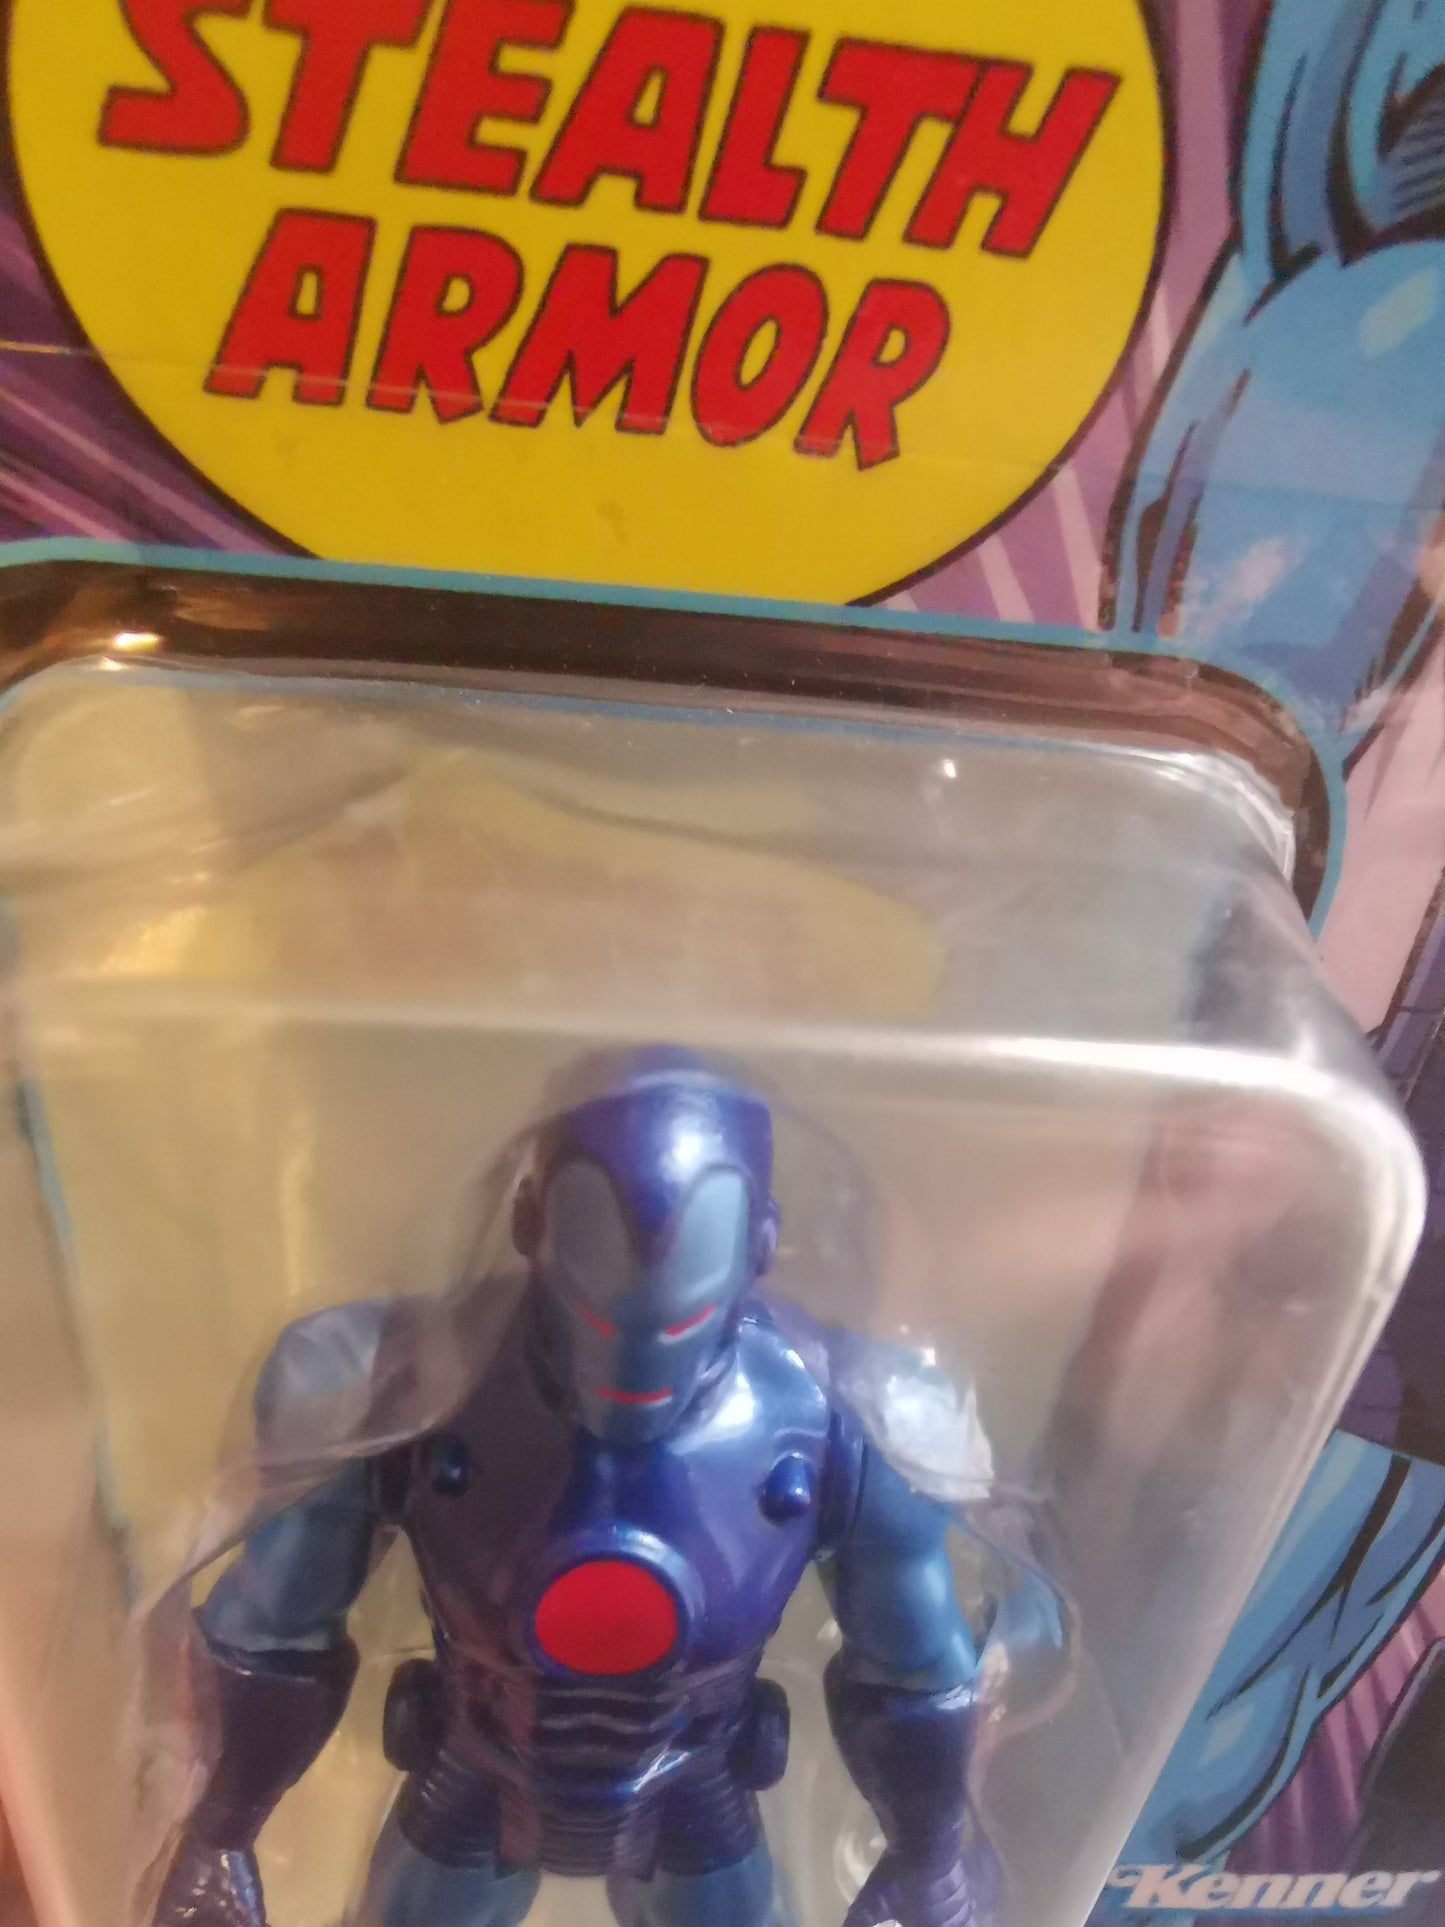 MARVEL LEGENDS RECOLLECT RETRO 3.75 STEALTH ARMOR IRON MAN Figure (slight dent in bubble)